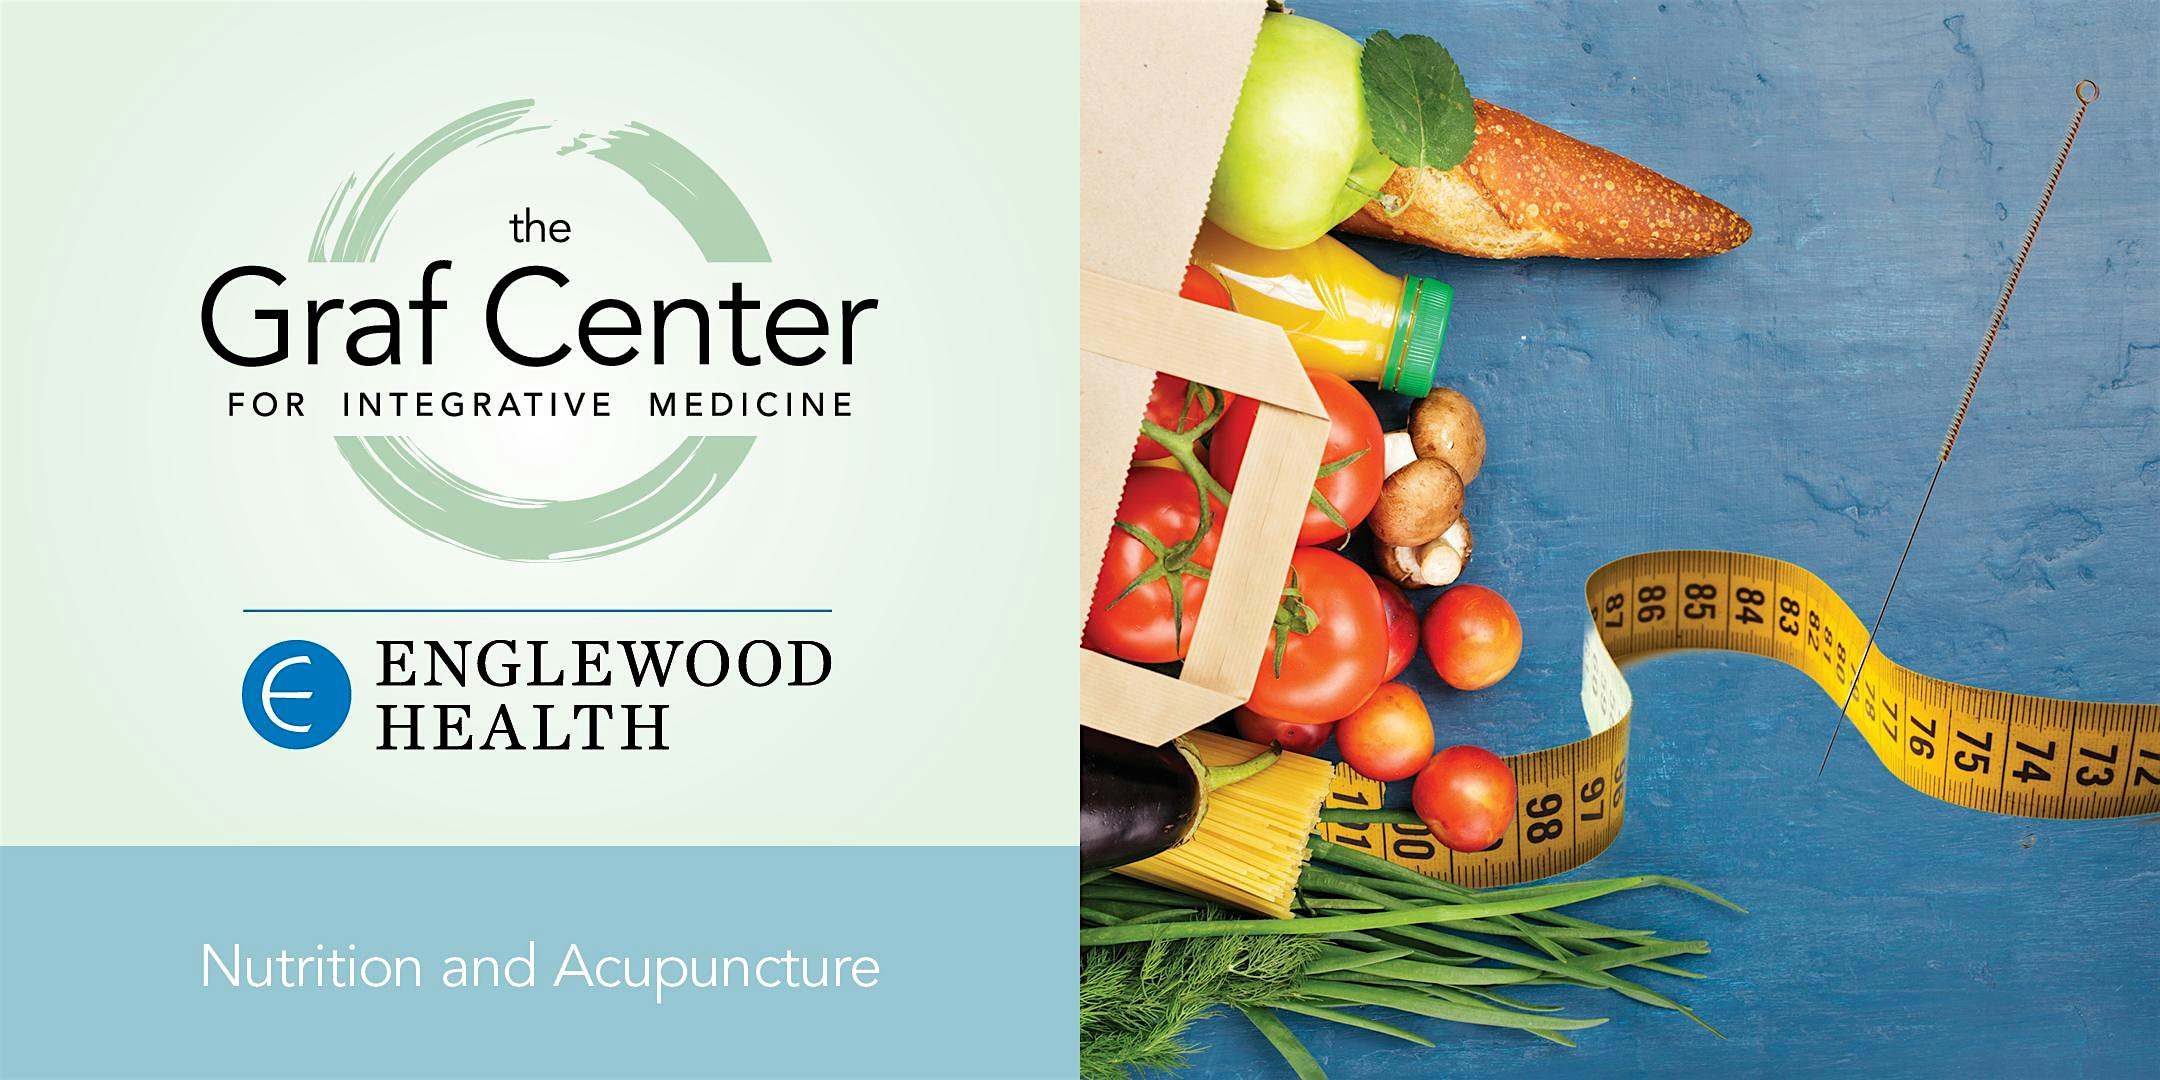 More info: Nutritional Support and Acupuncture for Weight Loss (4-Session Series)